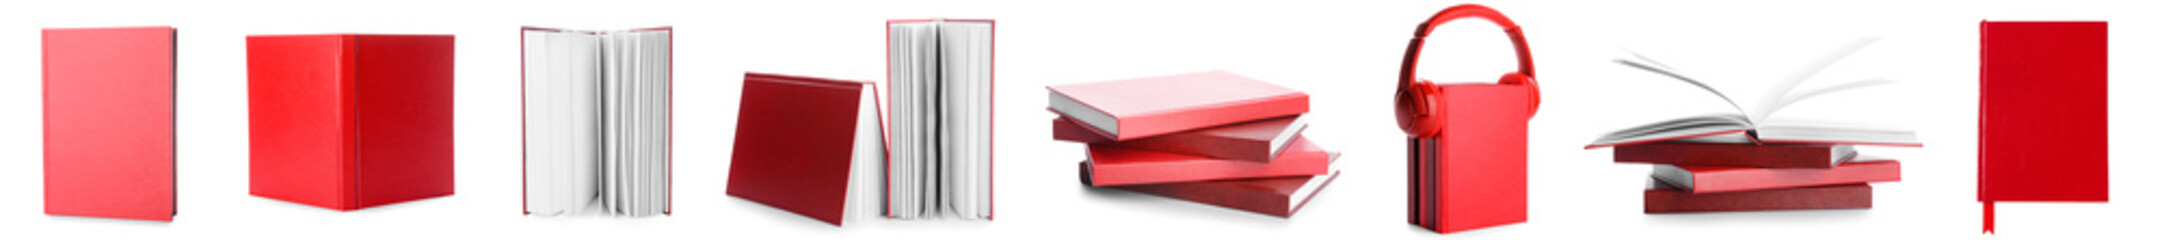 Set of red books isolated on white